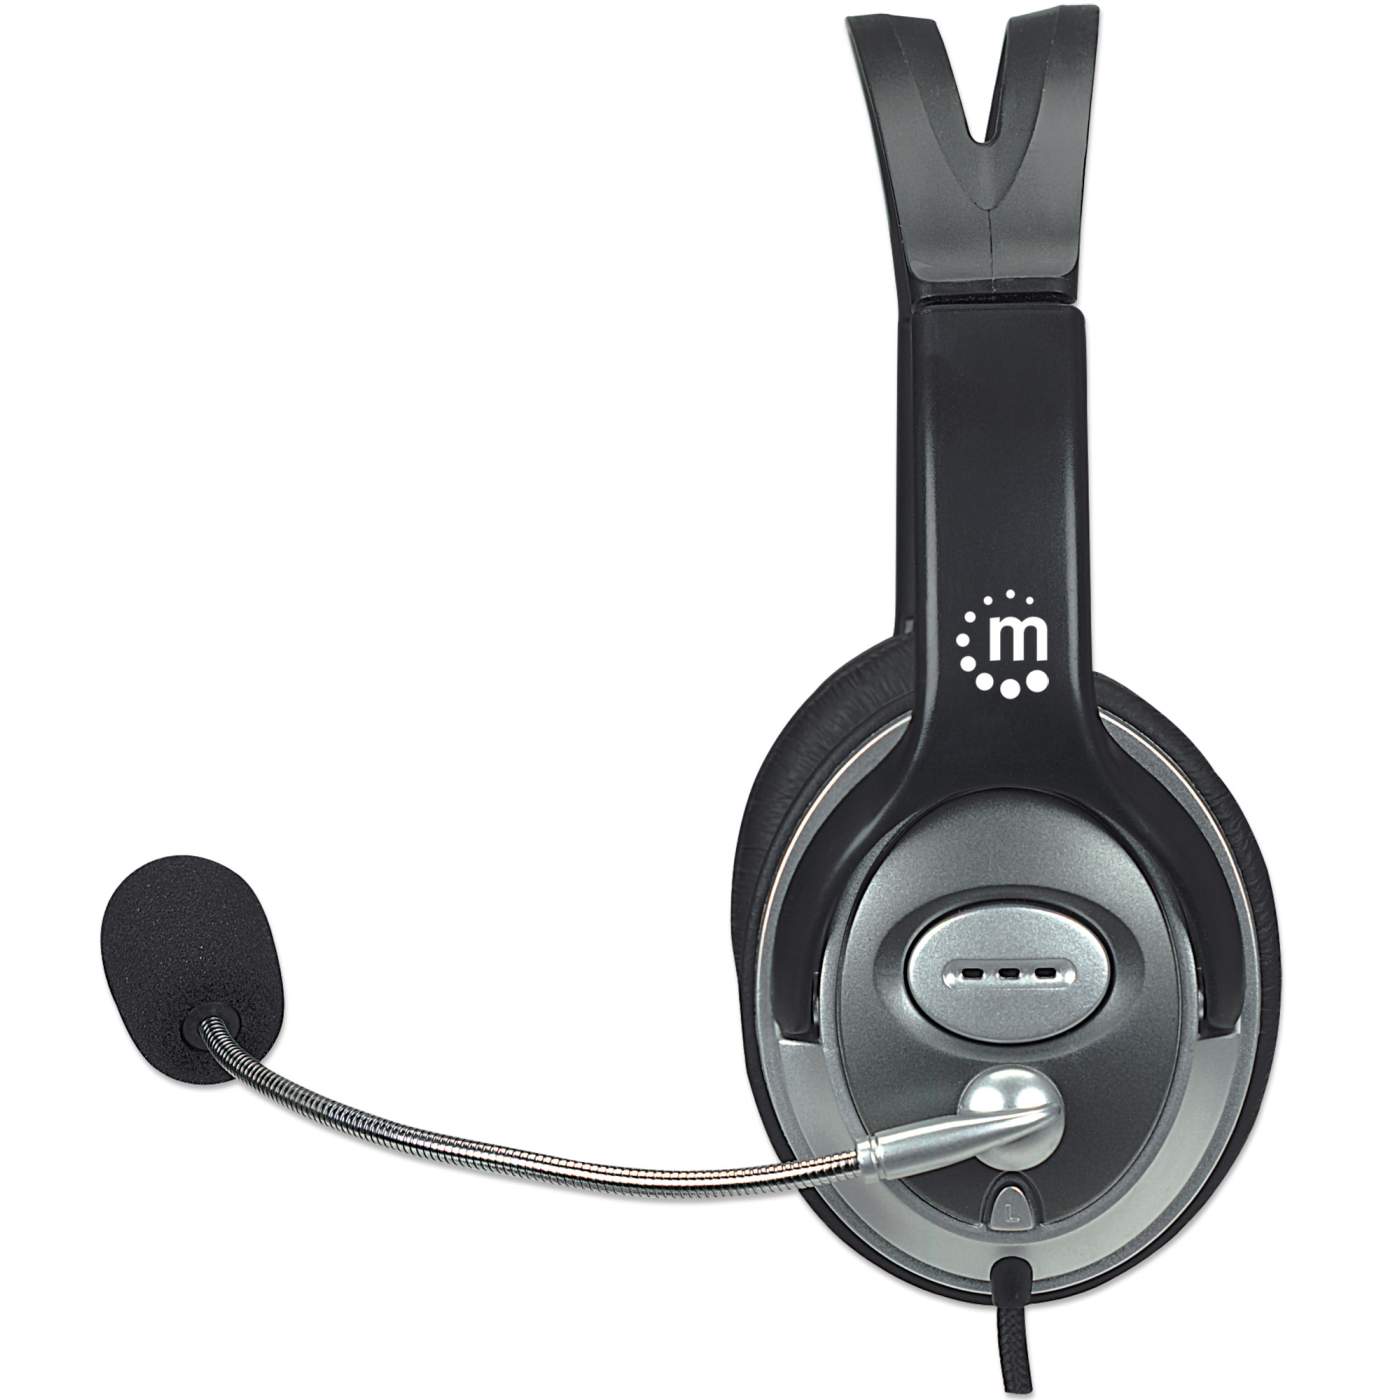 HS1 Classic Stereo Headset